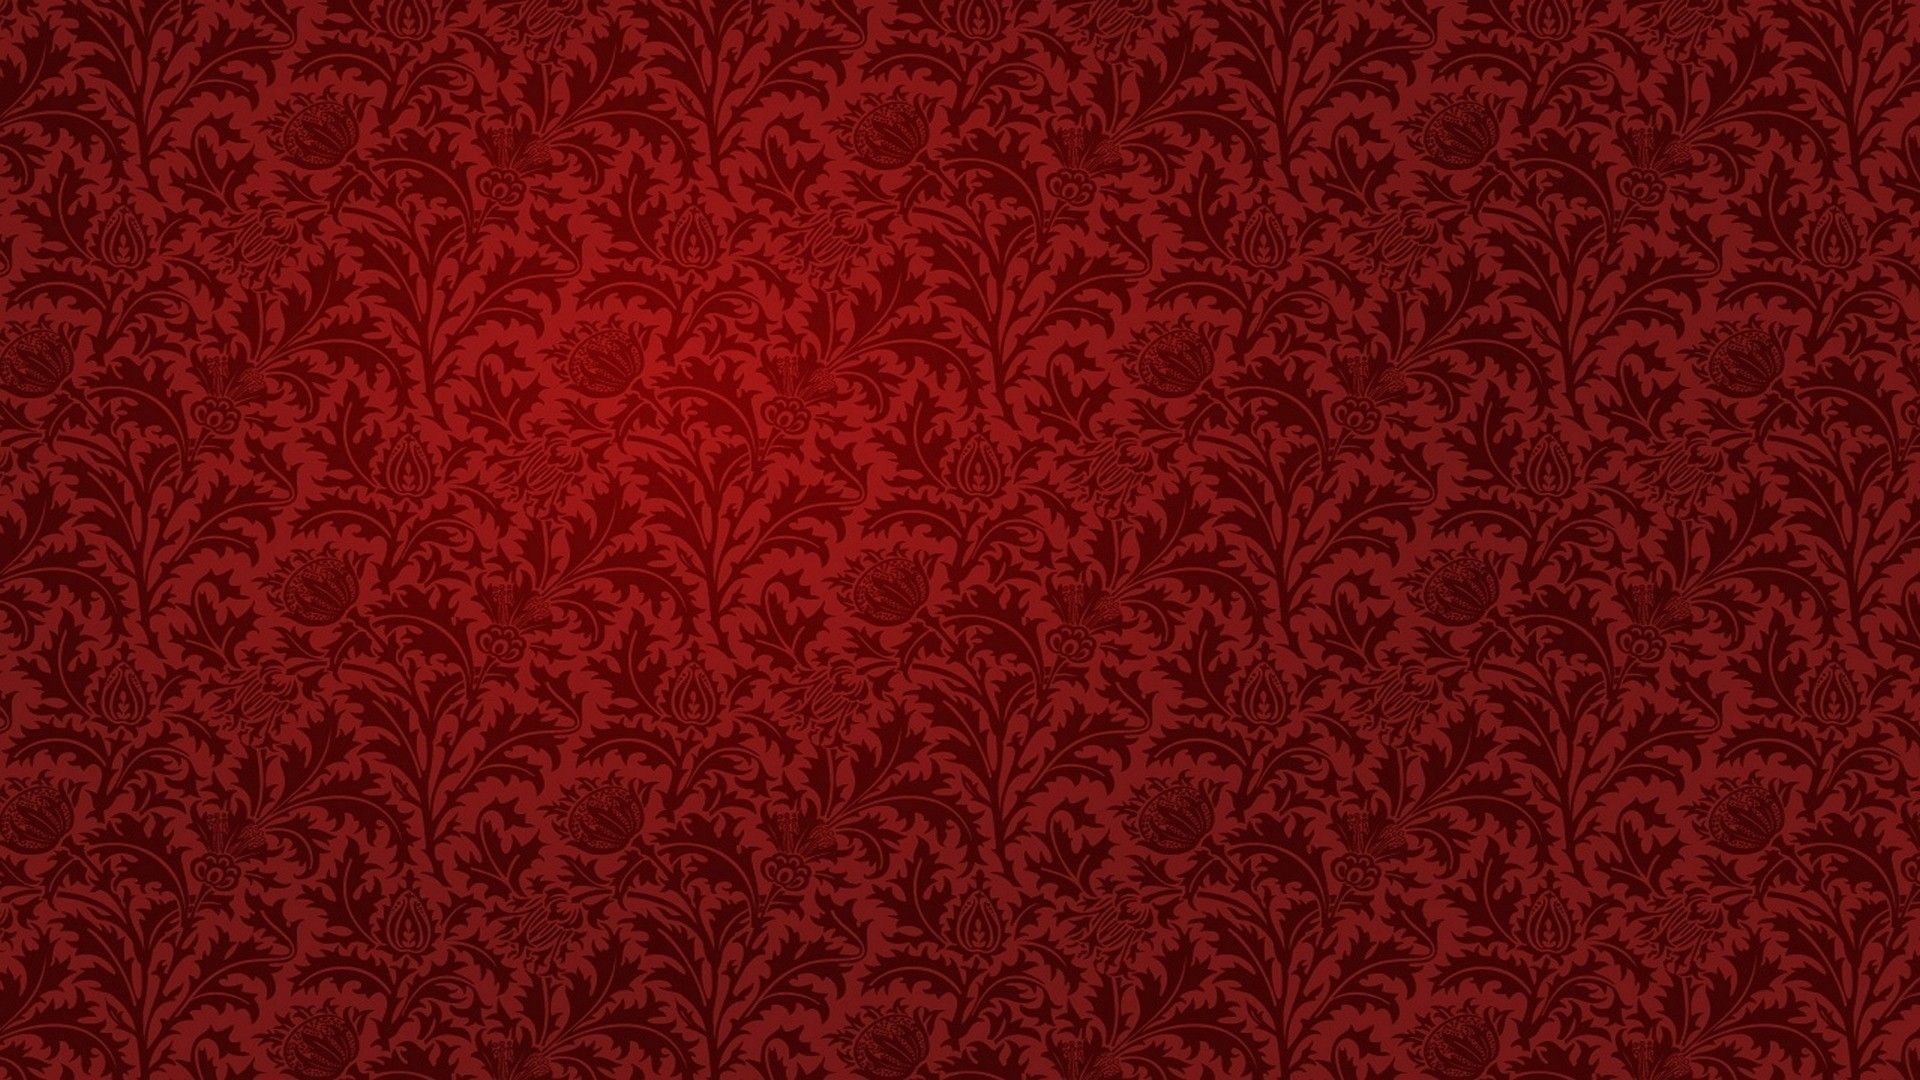 Vintage Red Aesthetic Wallpapers